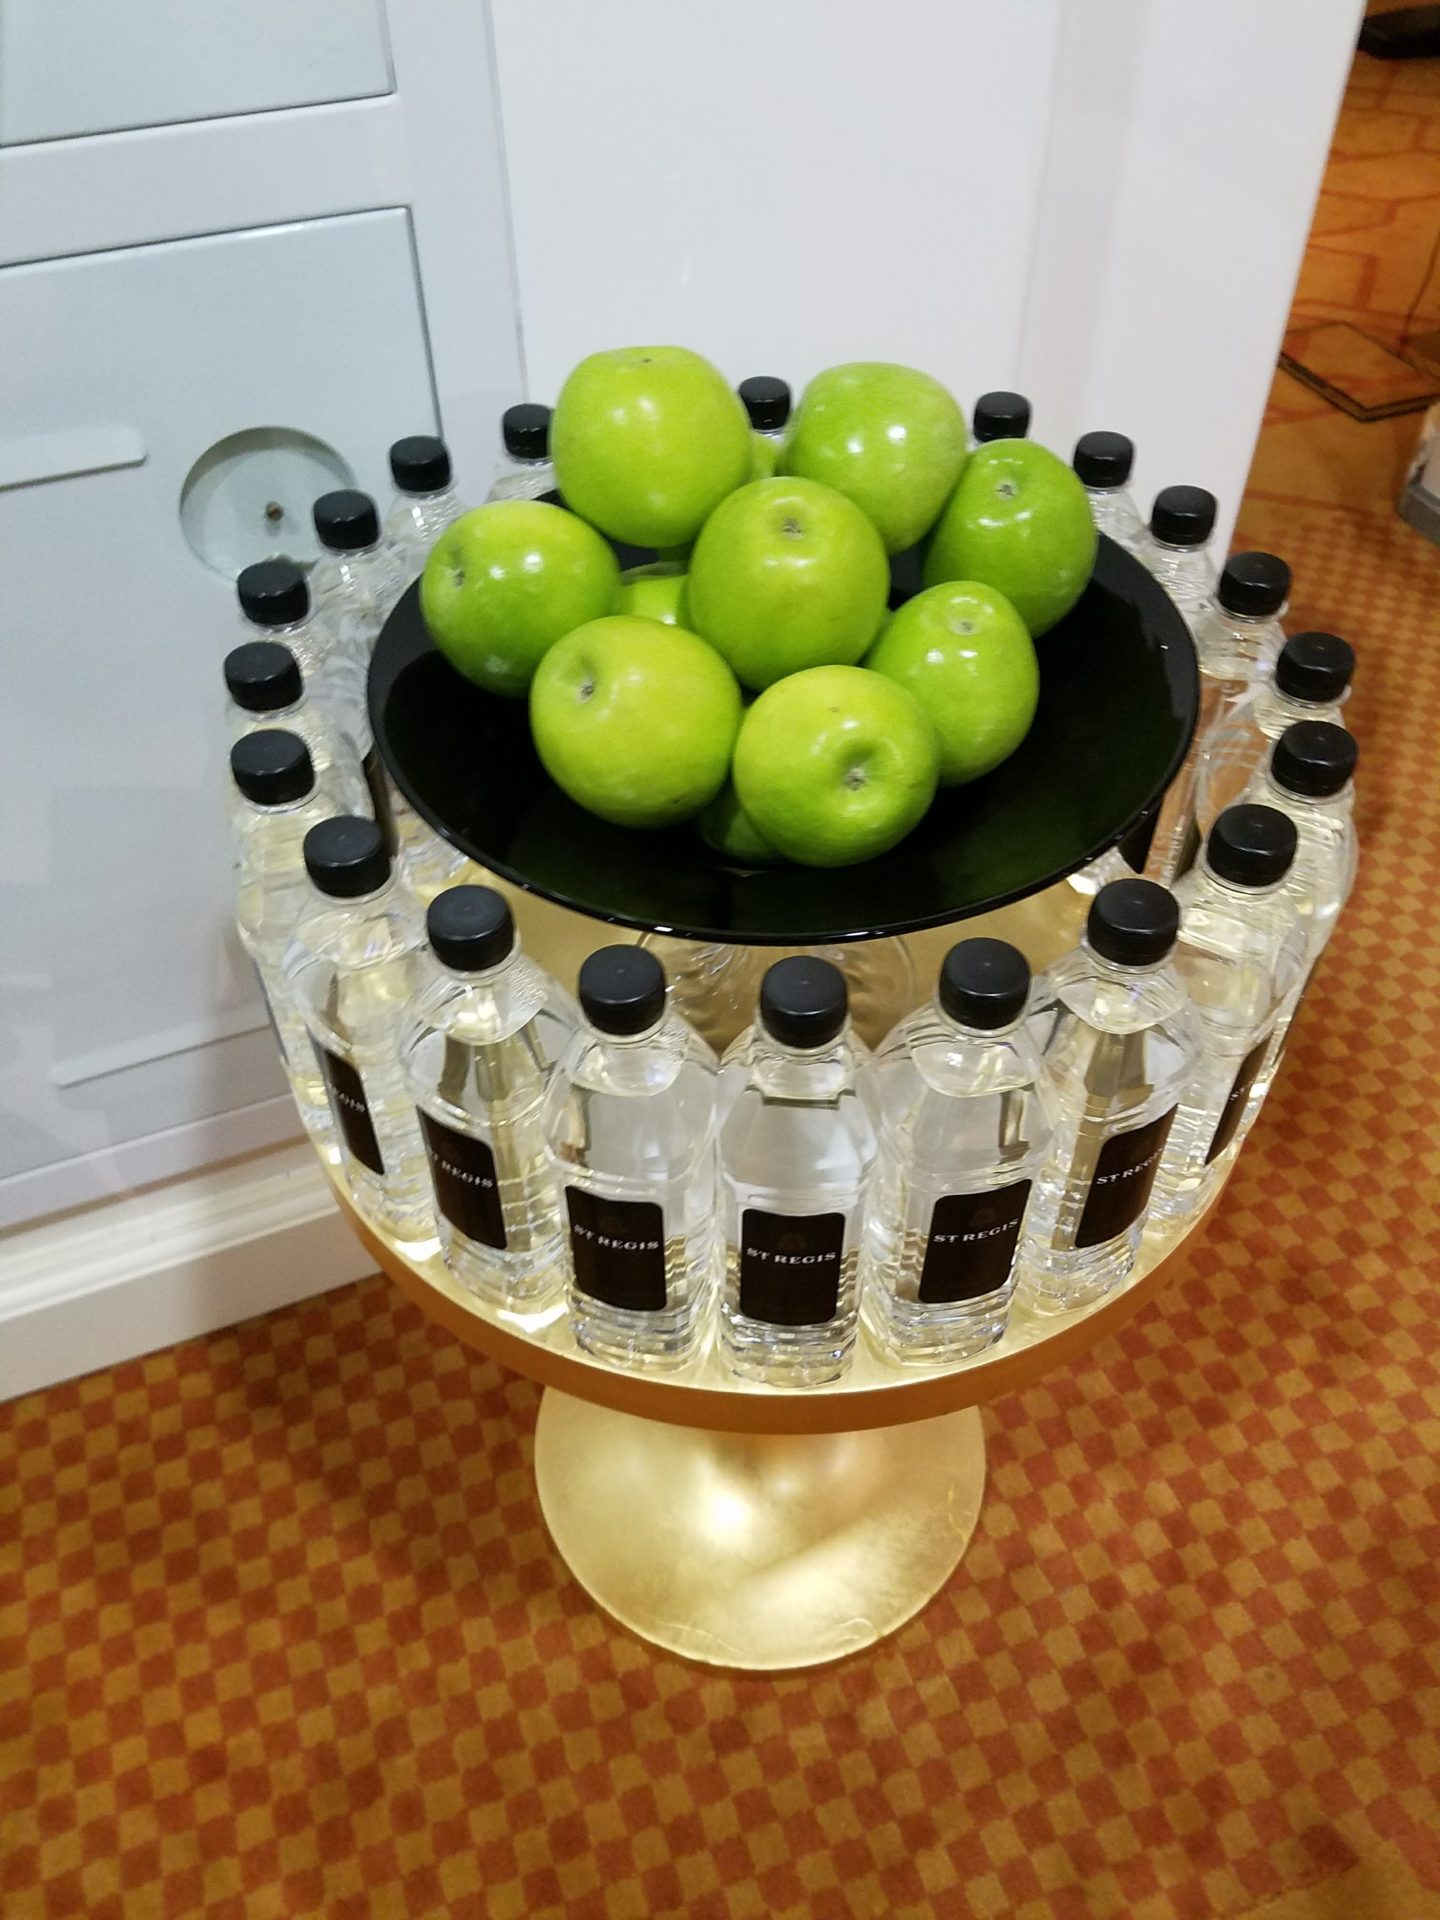 a group of bottles of water and a bowl of green apples